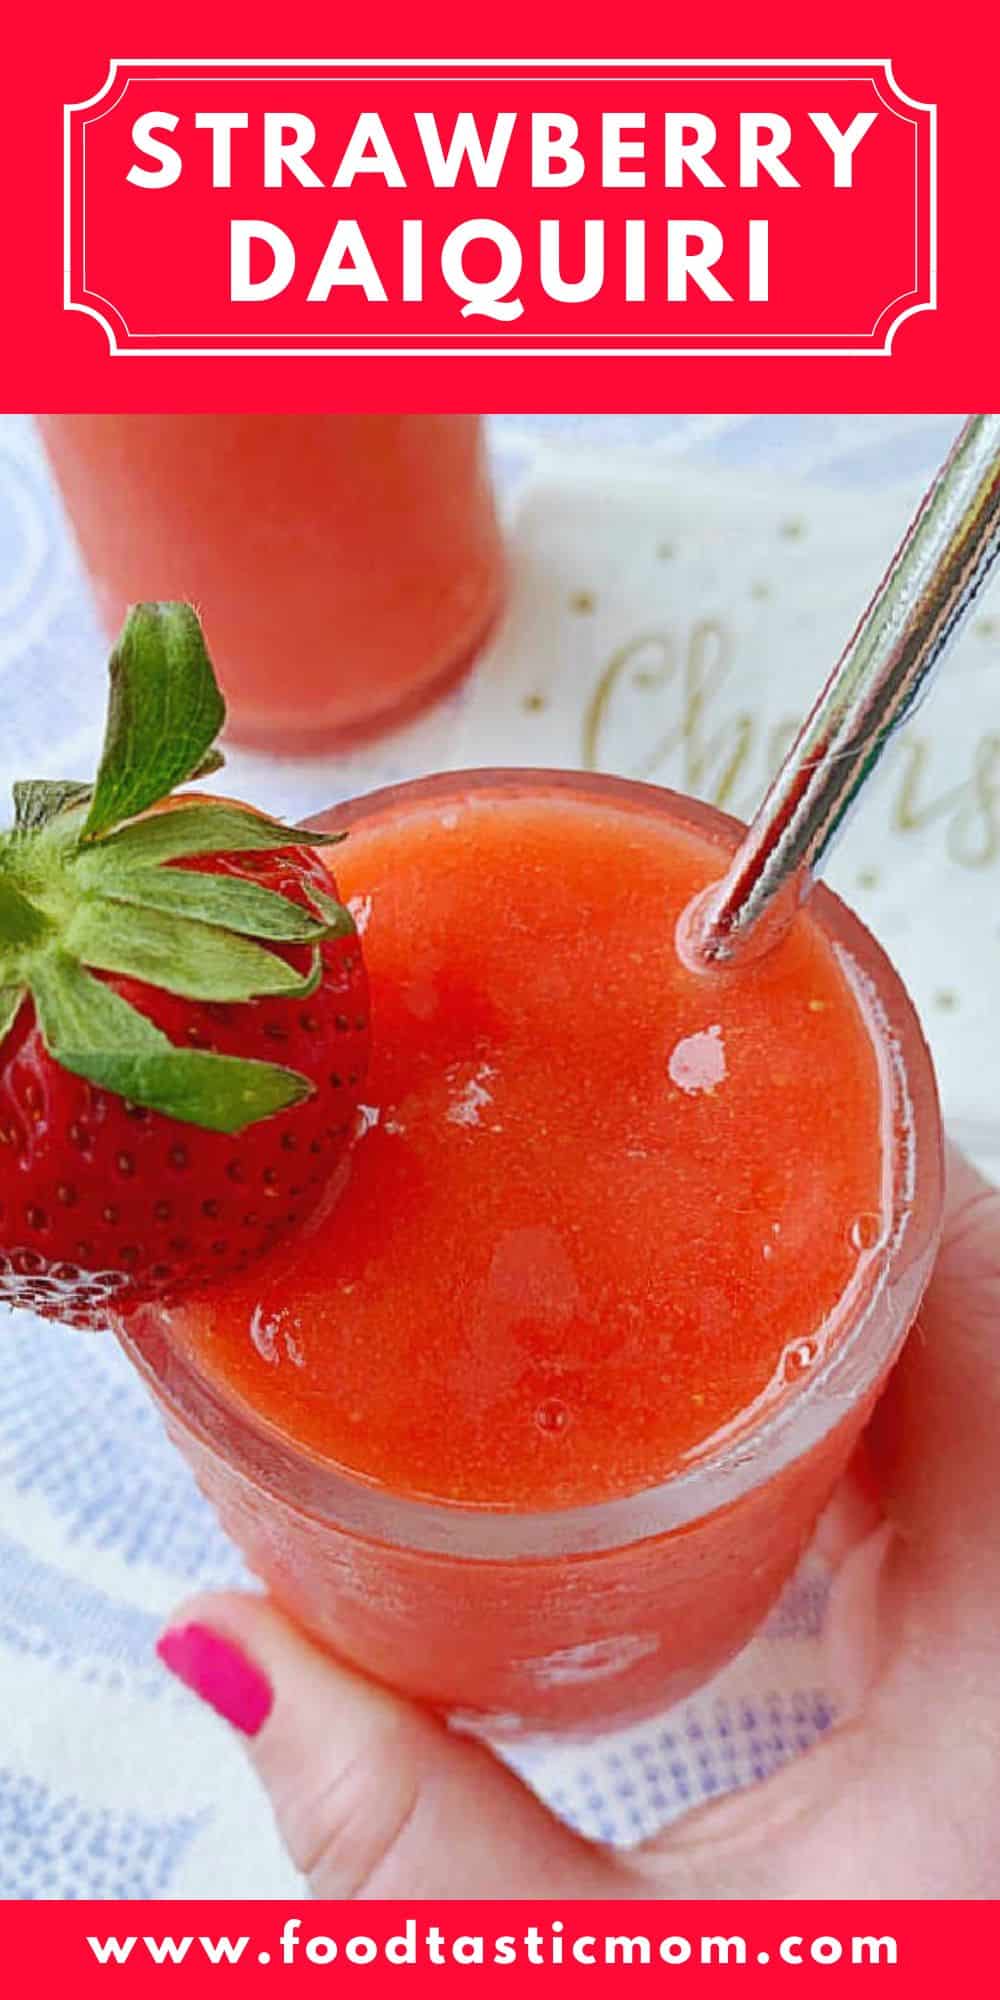 The best strawberry daiquiri is made with simple ingredients - frozen berries, the best rum, strawberry jam, powdered sugar and cardamom. via @foodtasticmom